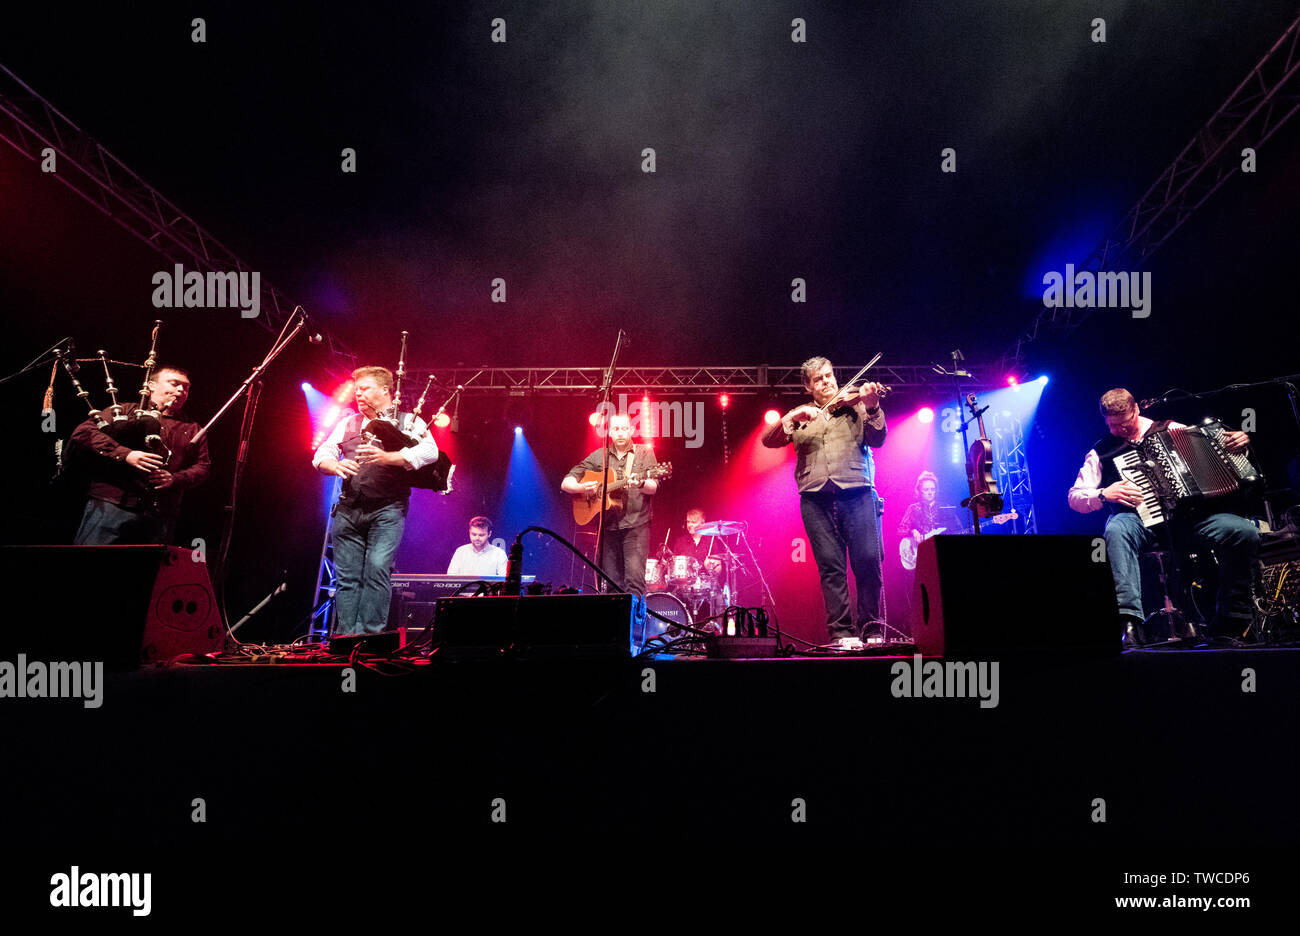 Celtic music band The Skipinnish live on stage at the Gate to Southwell festival, 2019 Stock Photo